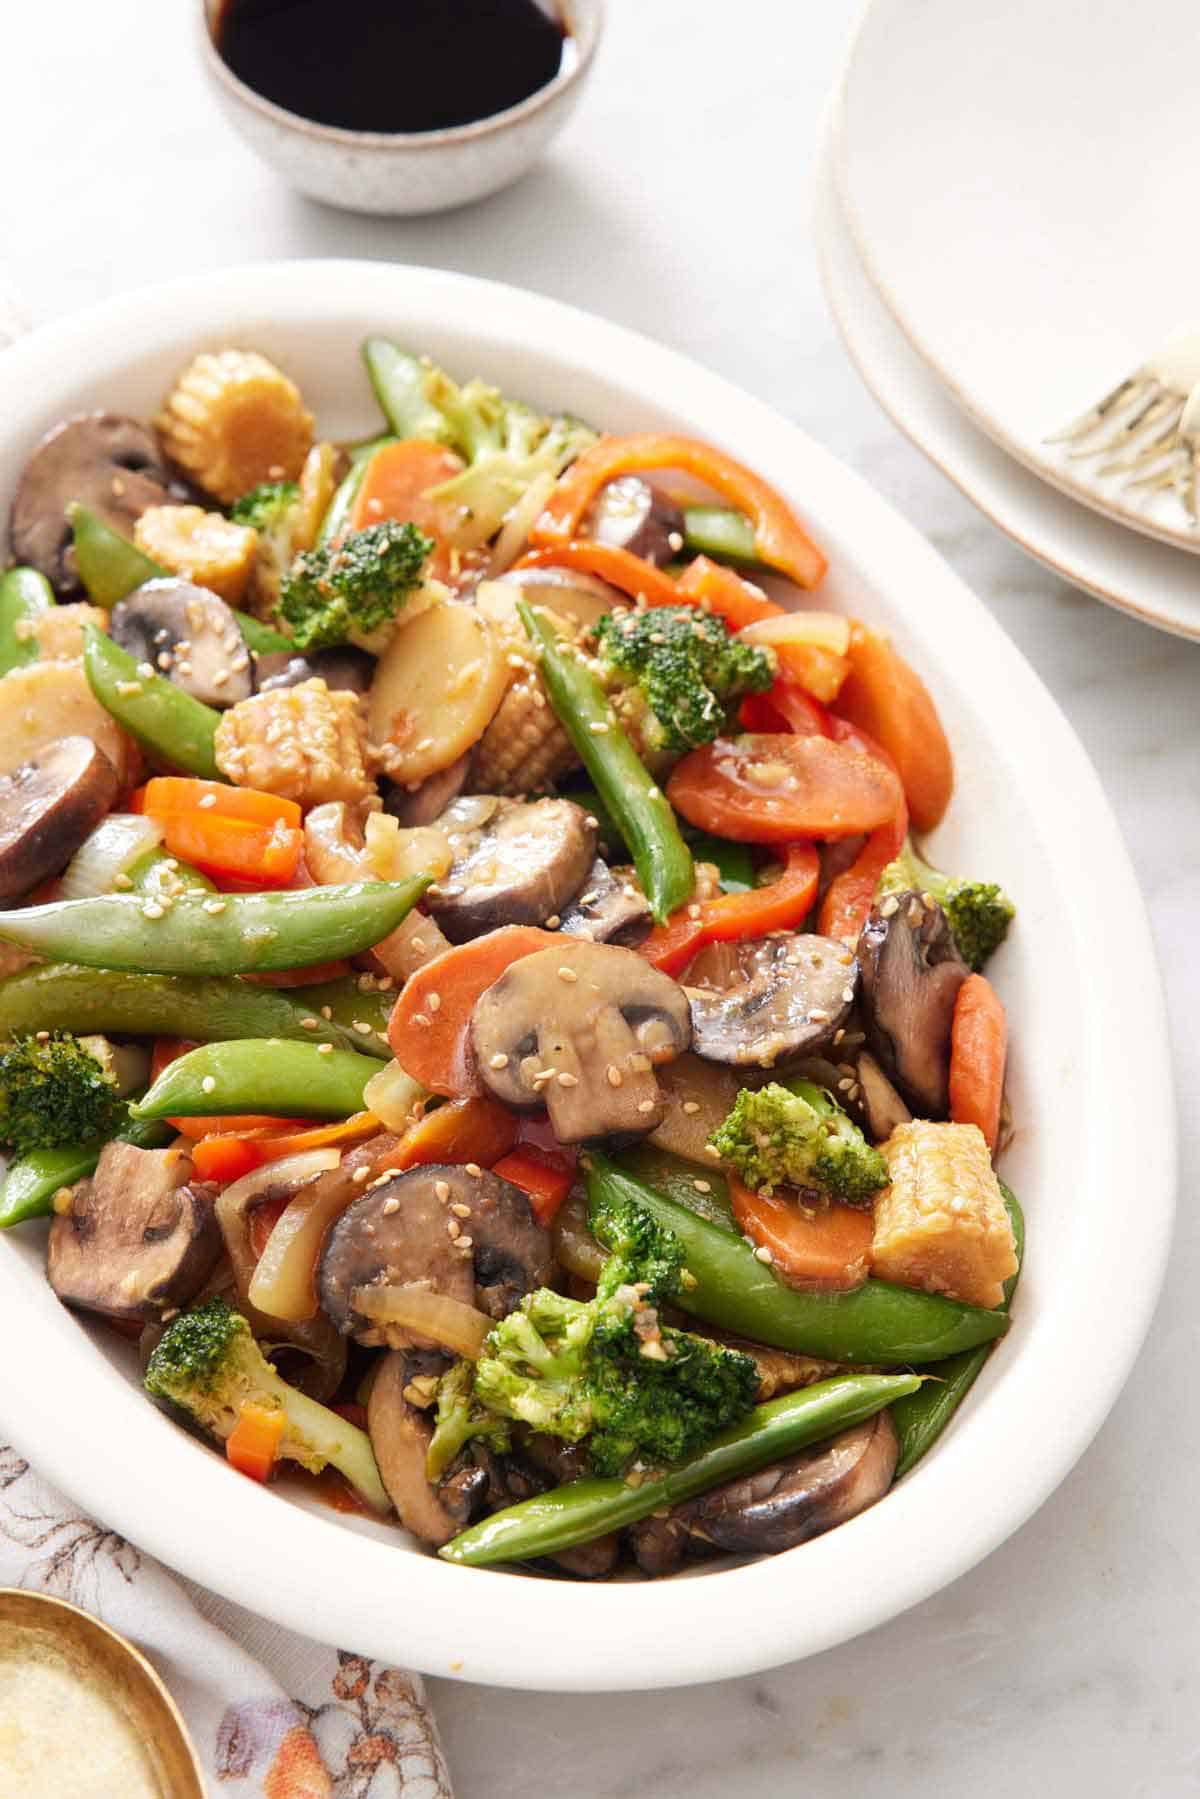 A platter of vegetable stir fry with a bowl of sauce in the back.